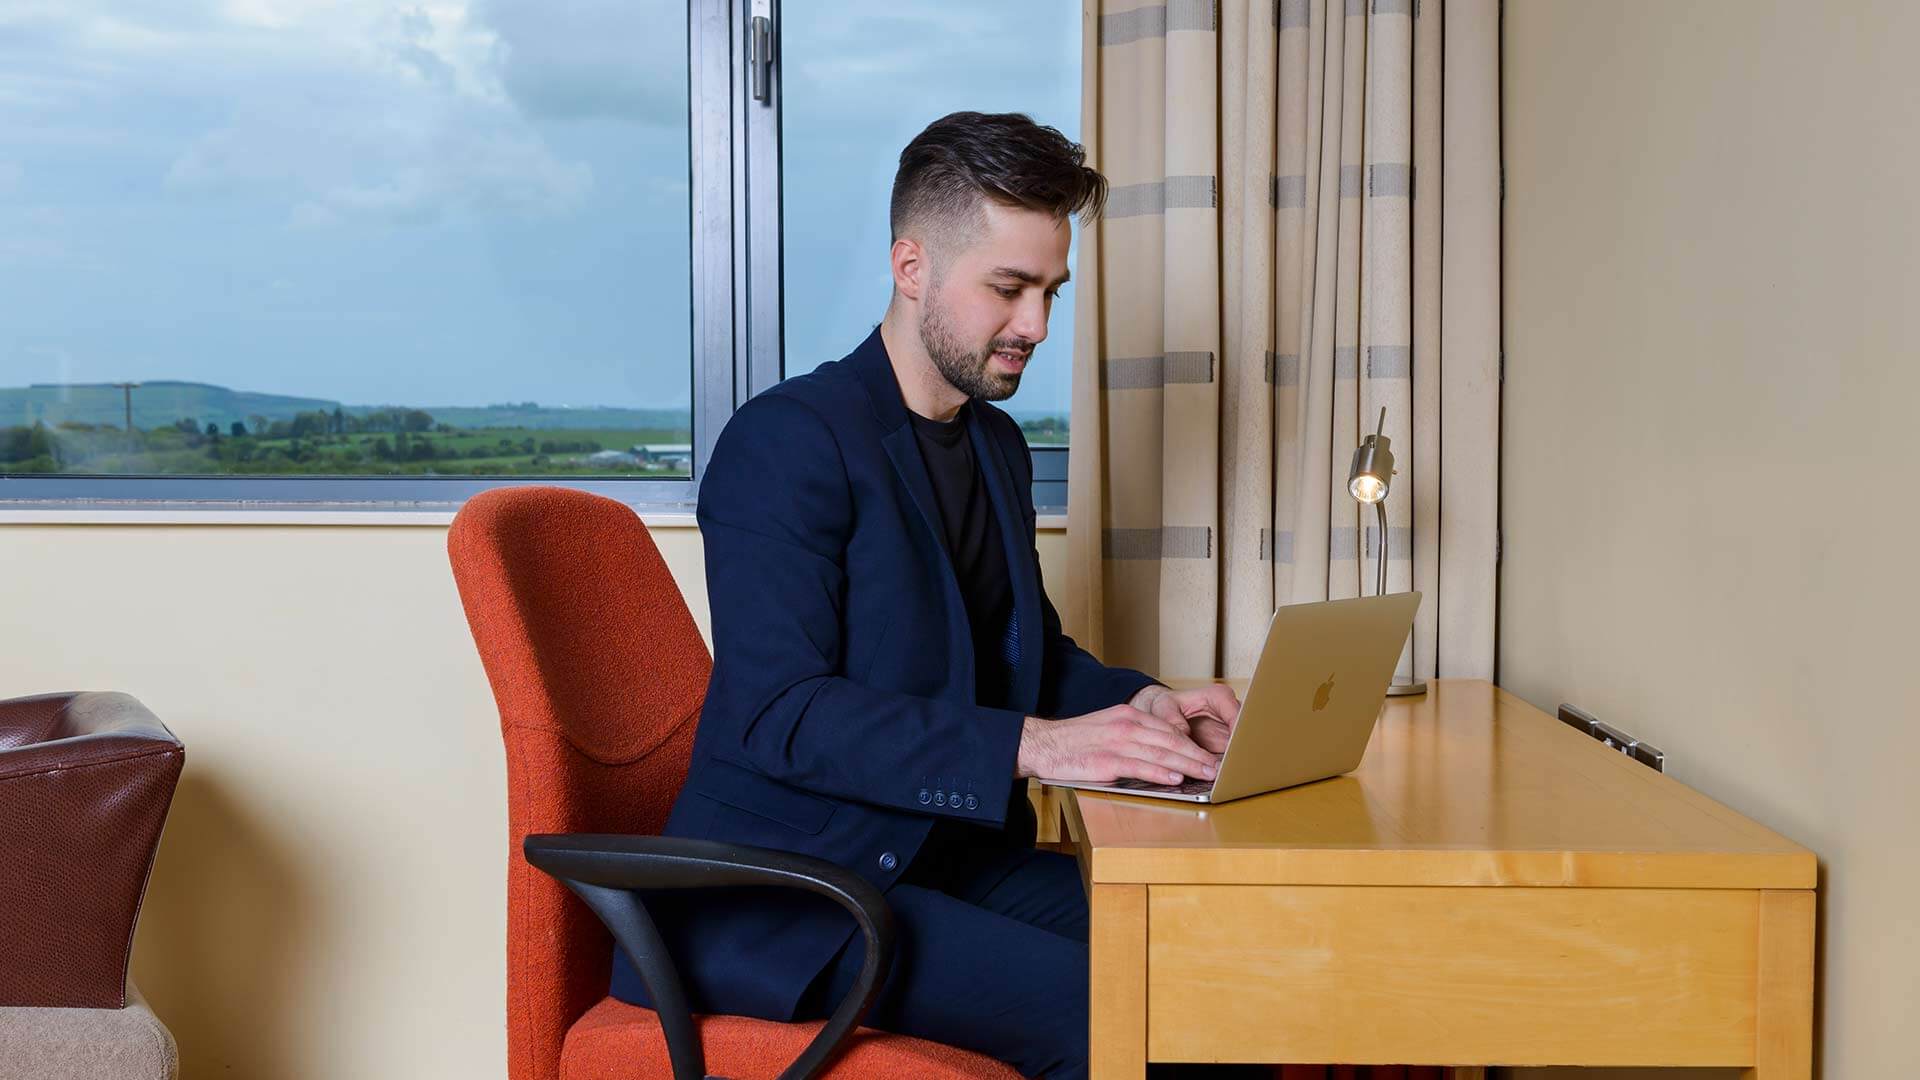 Man sitting at desk in hotel room typing on a laptop